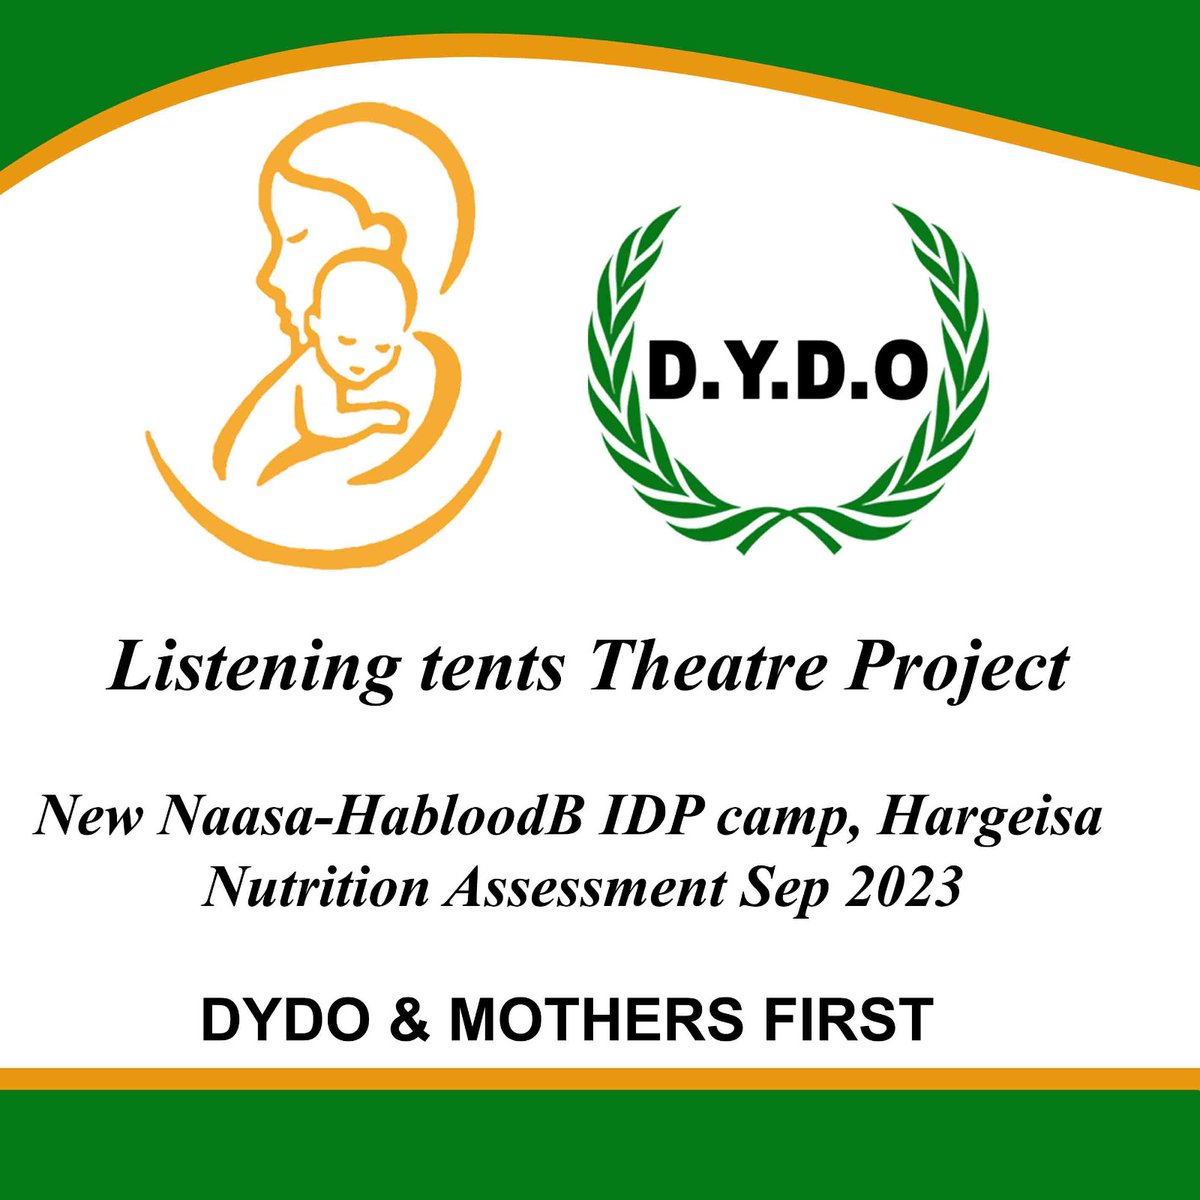 Listening tents Theatre Project, New Naasa-HabloodB IDP Camp) Nutrition Assessment jointly conducting DYDO & Mothers First, Irish Organization in Sep 2023